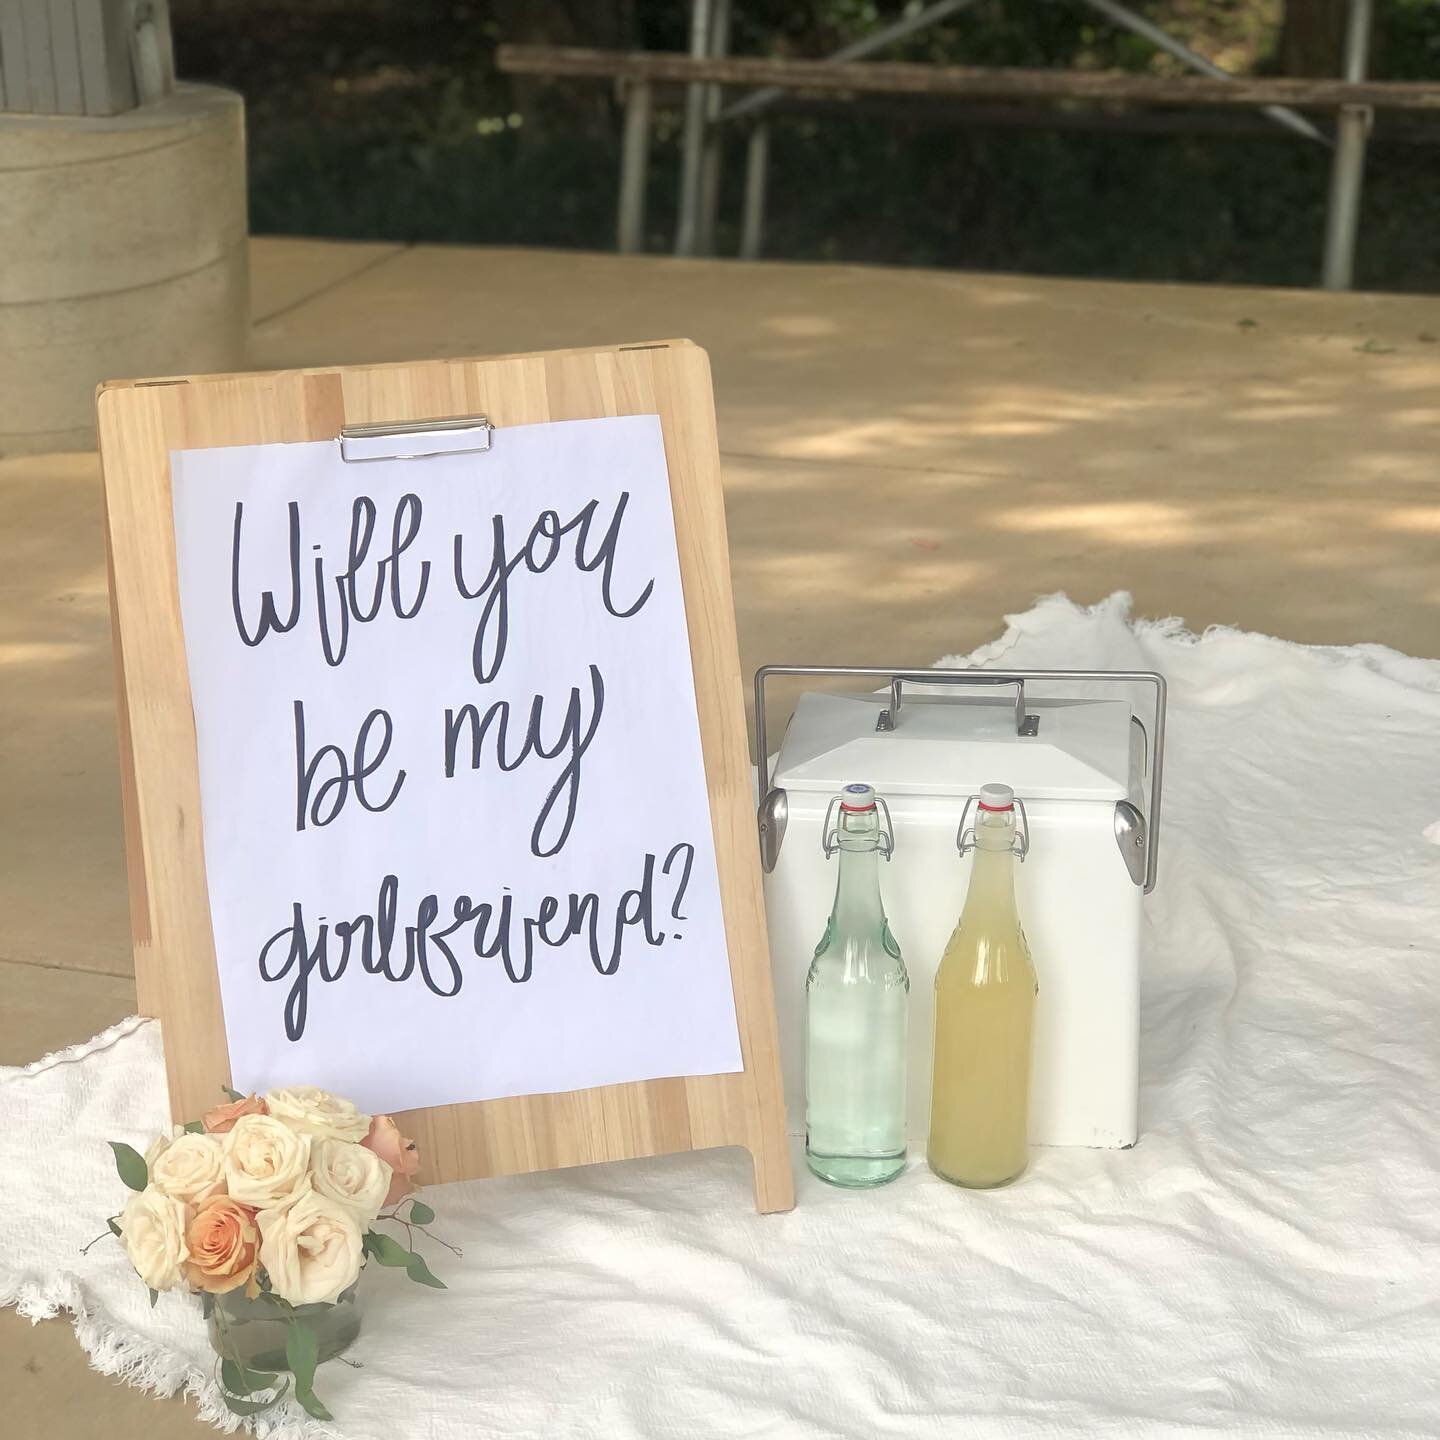 And this is how you pop the question!💕💕✨
.
.
.
.
.

#thegatheringpicnicco&nbsp;#clt&nbsp;#cltpicnic&nbsp;#cltpicnics&nbsp;#charlottedate&nbsp;#charlottedatenight&nbsp;#charlottepicnic&nbsp;#charlottepicnics&nbsp;#charlotteluxurypicnic&nbsp;&nbsp;#c